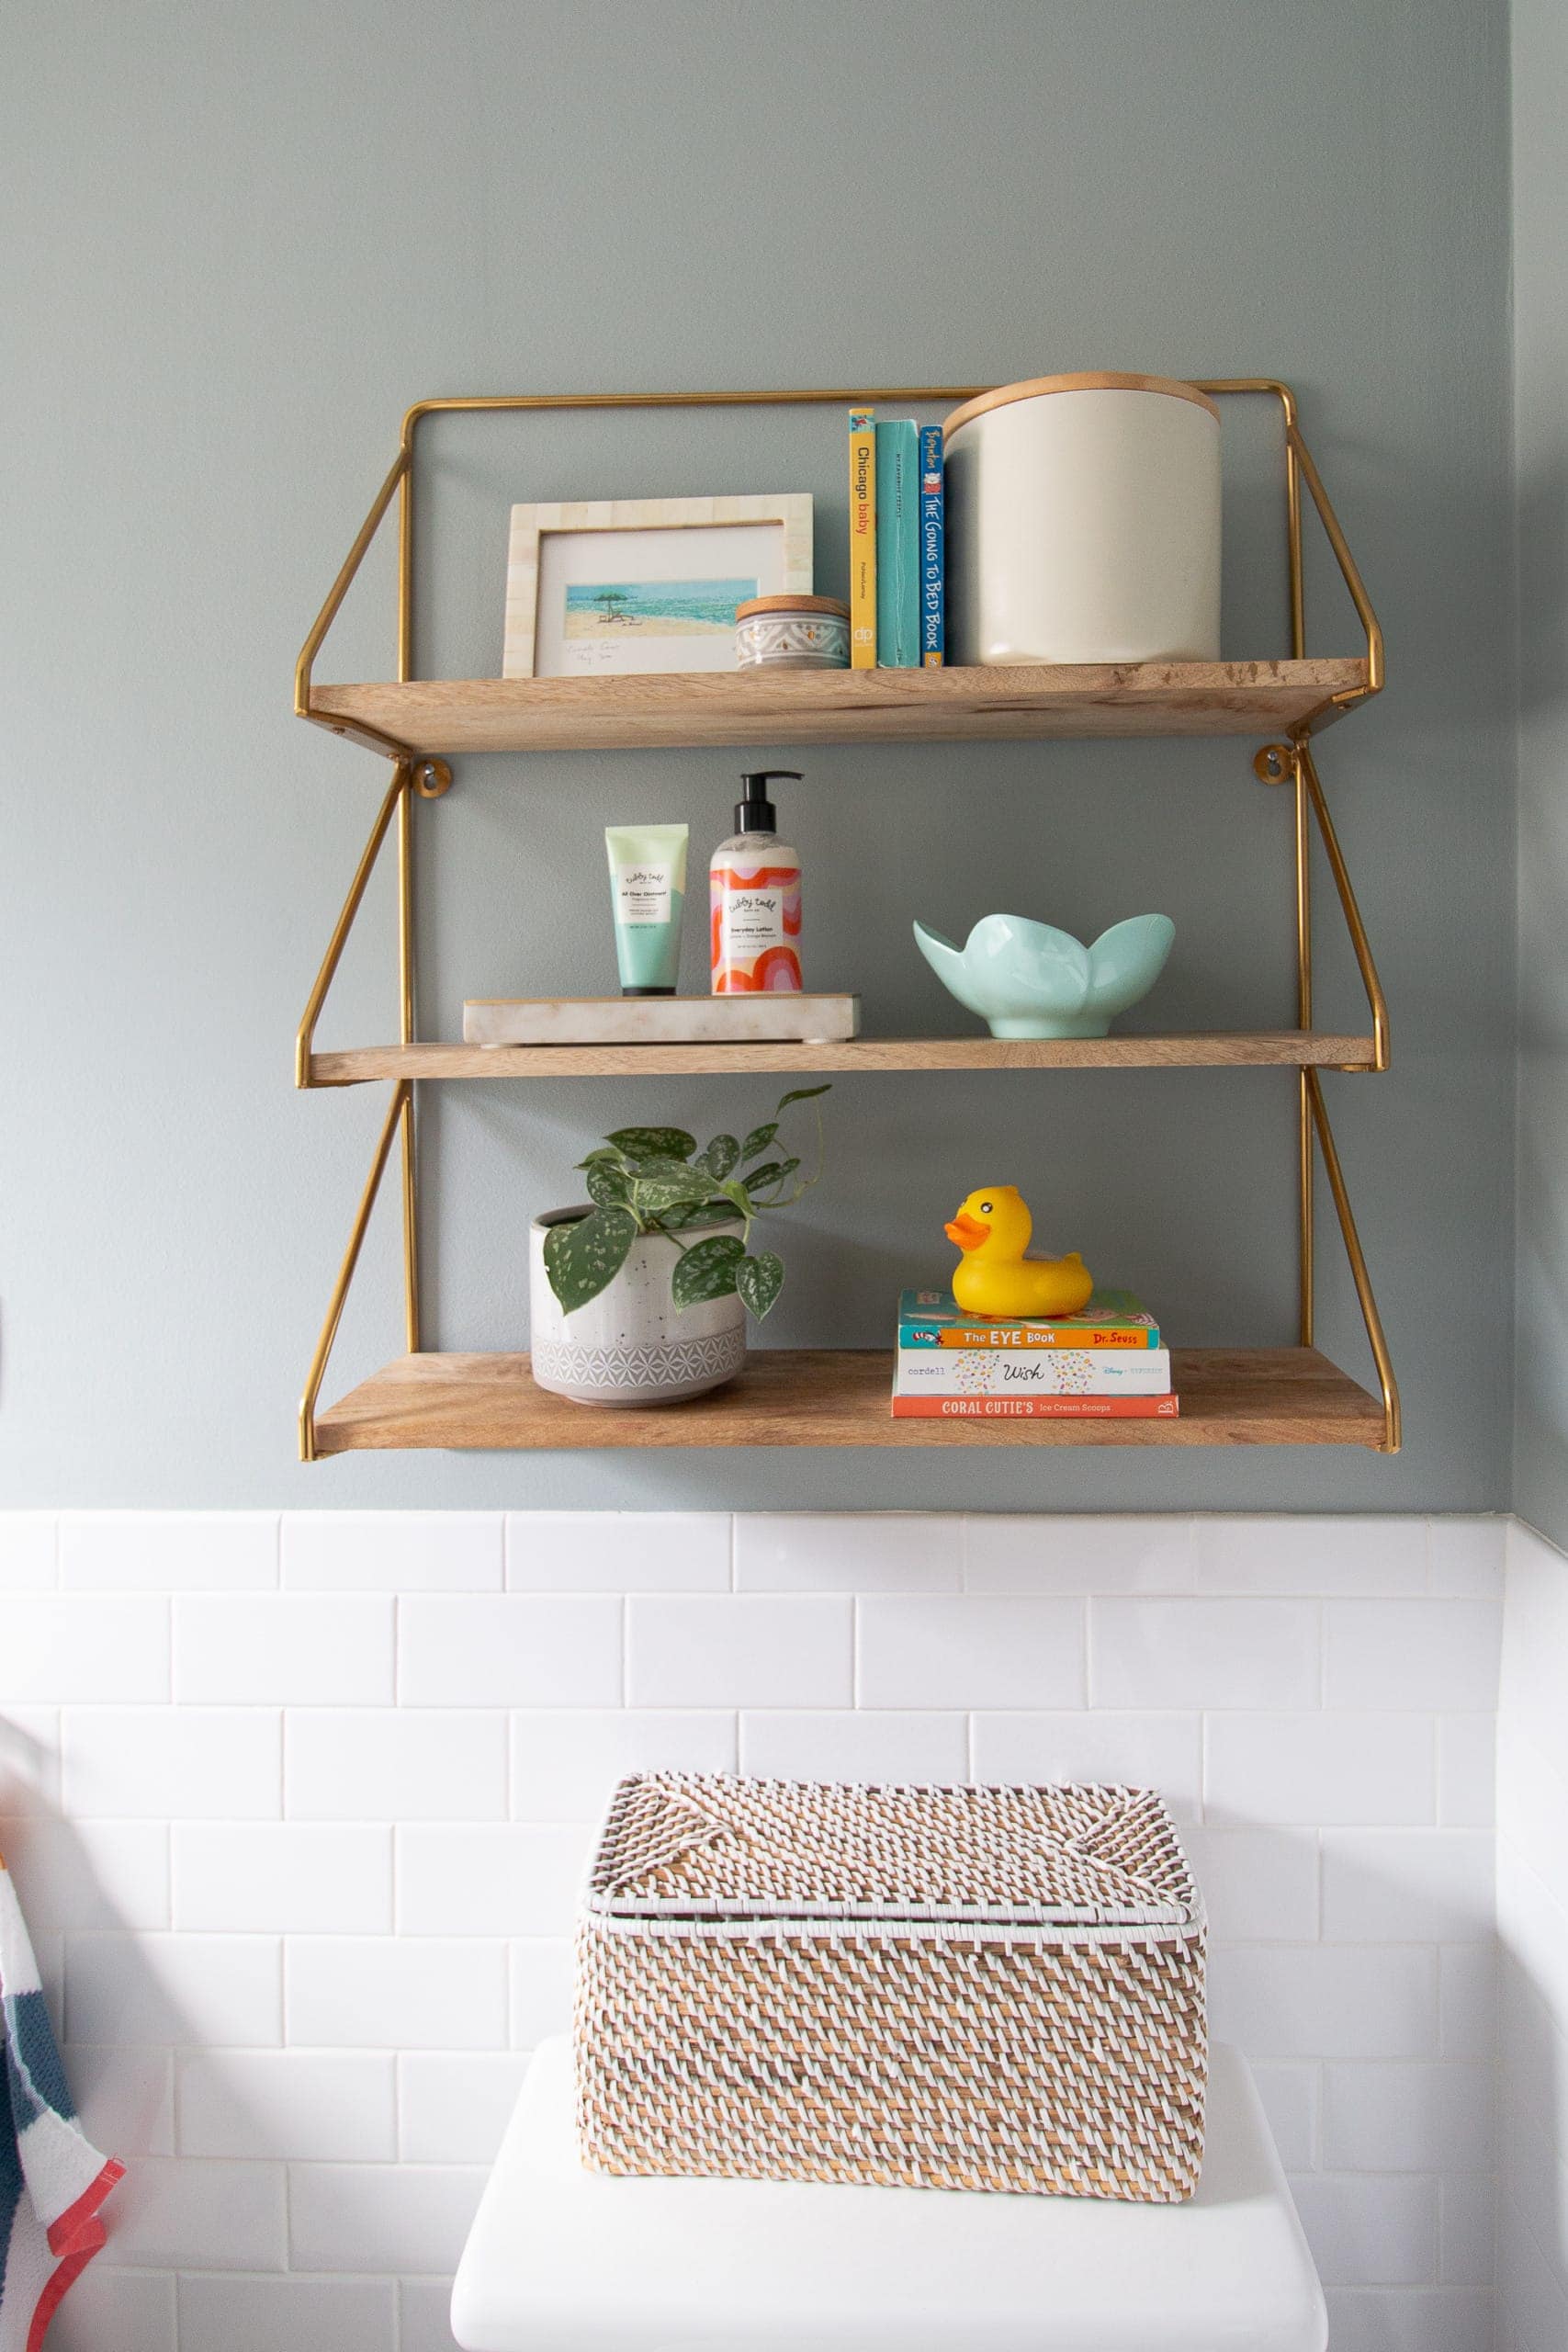 Styling shelves in a kids bathroom space